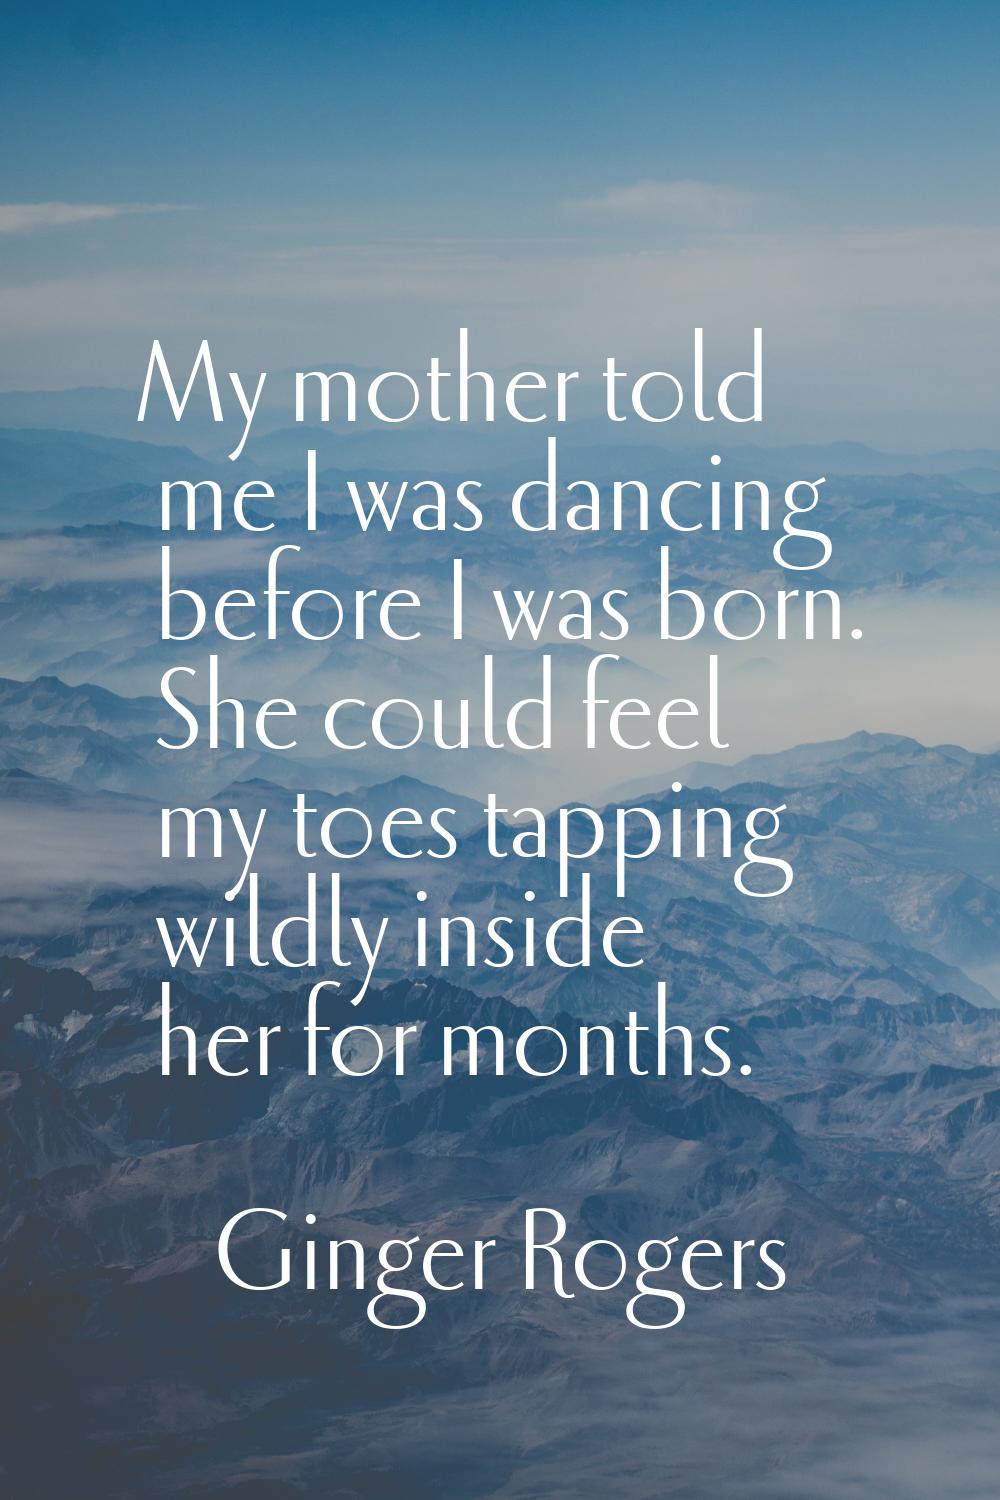 My mother told me I was dancing before I was born. She could feel my toes tapping wildly inside her